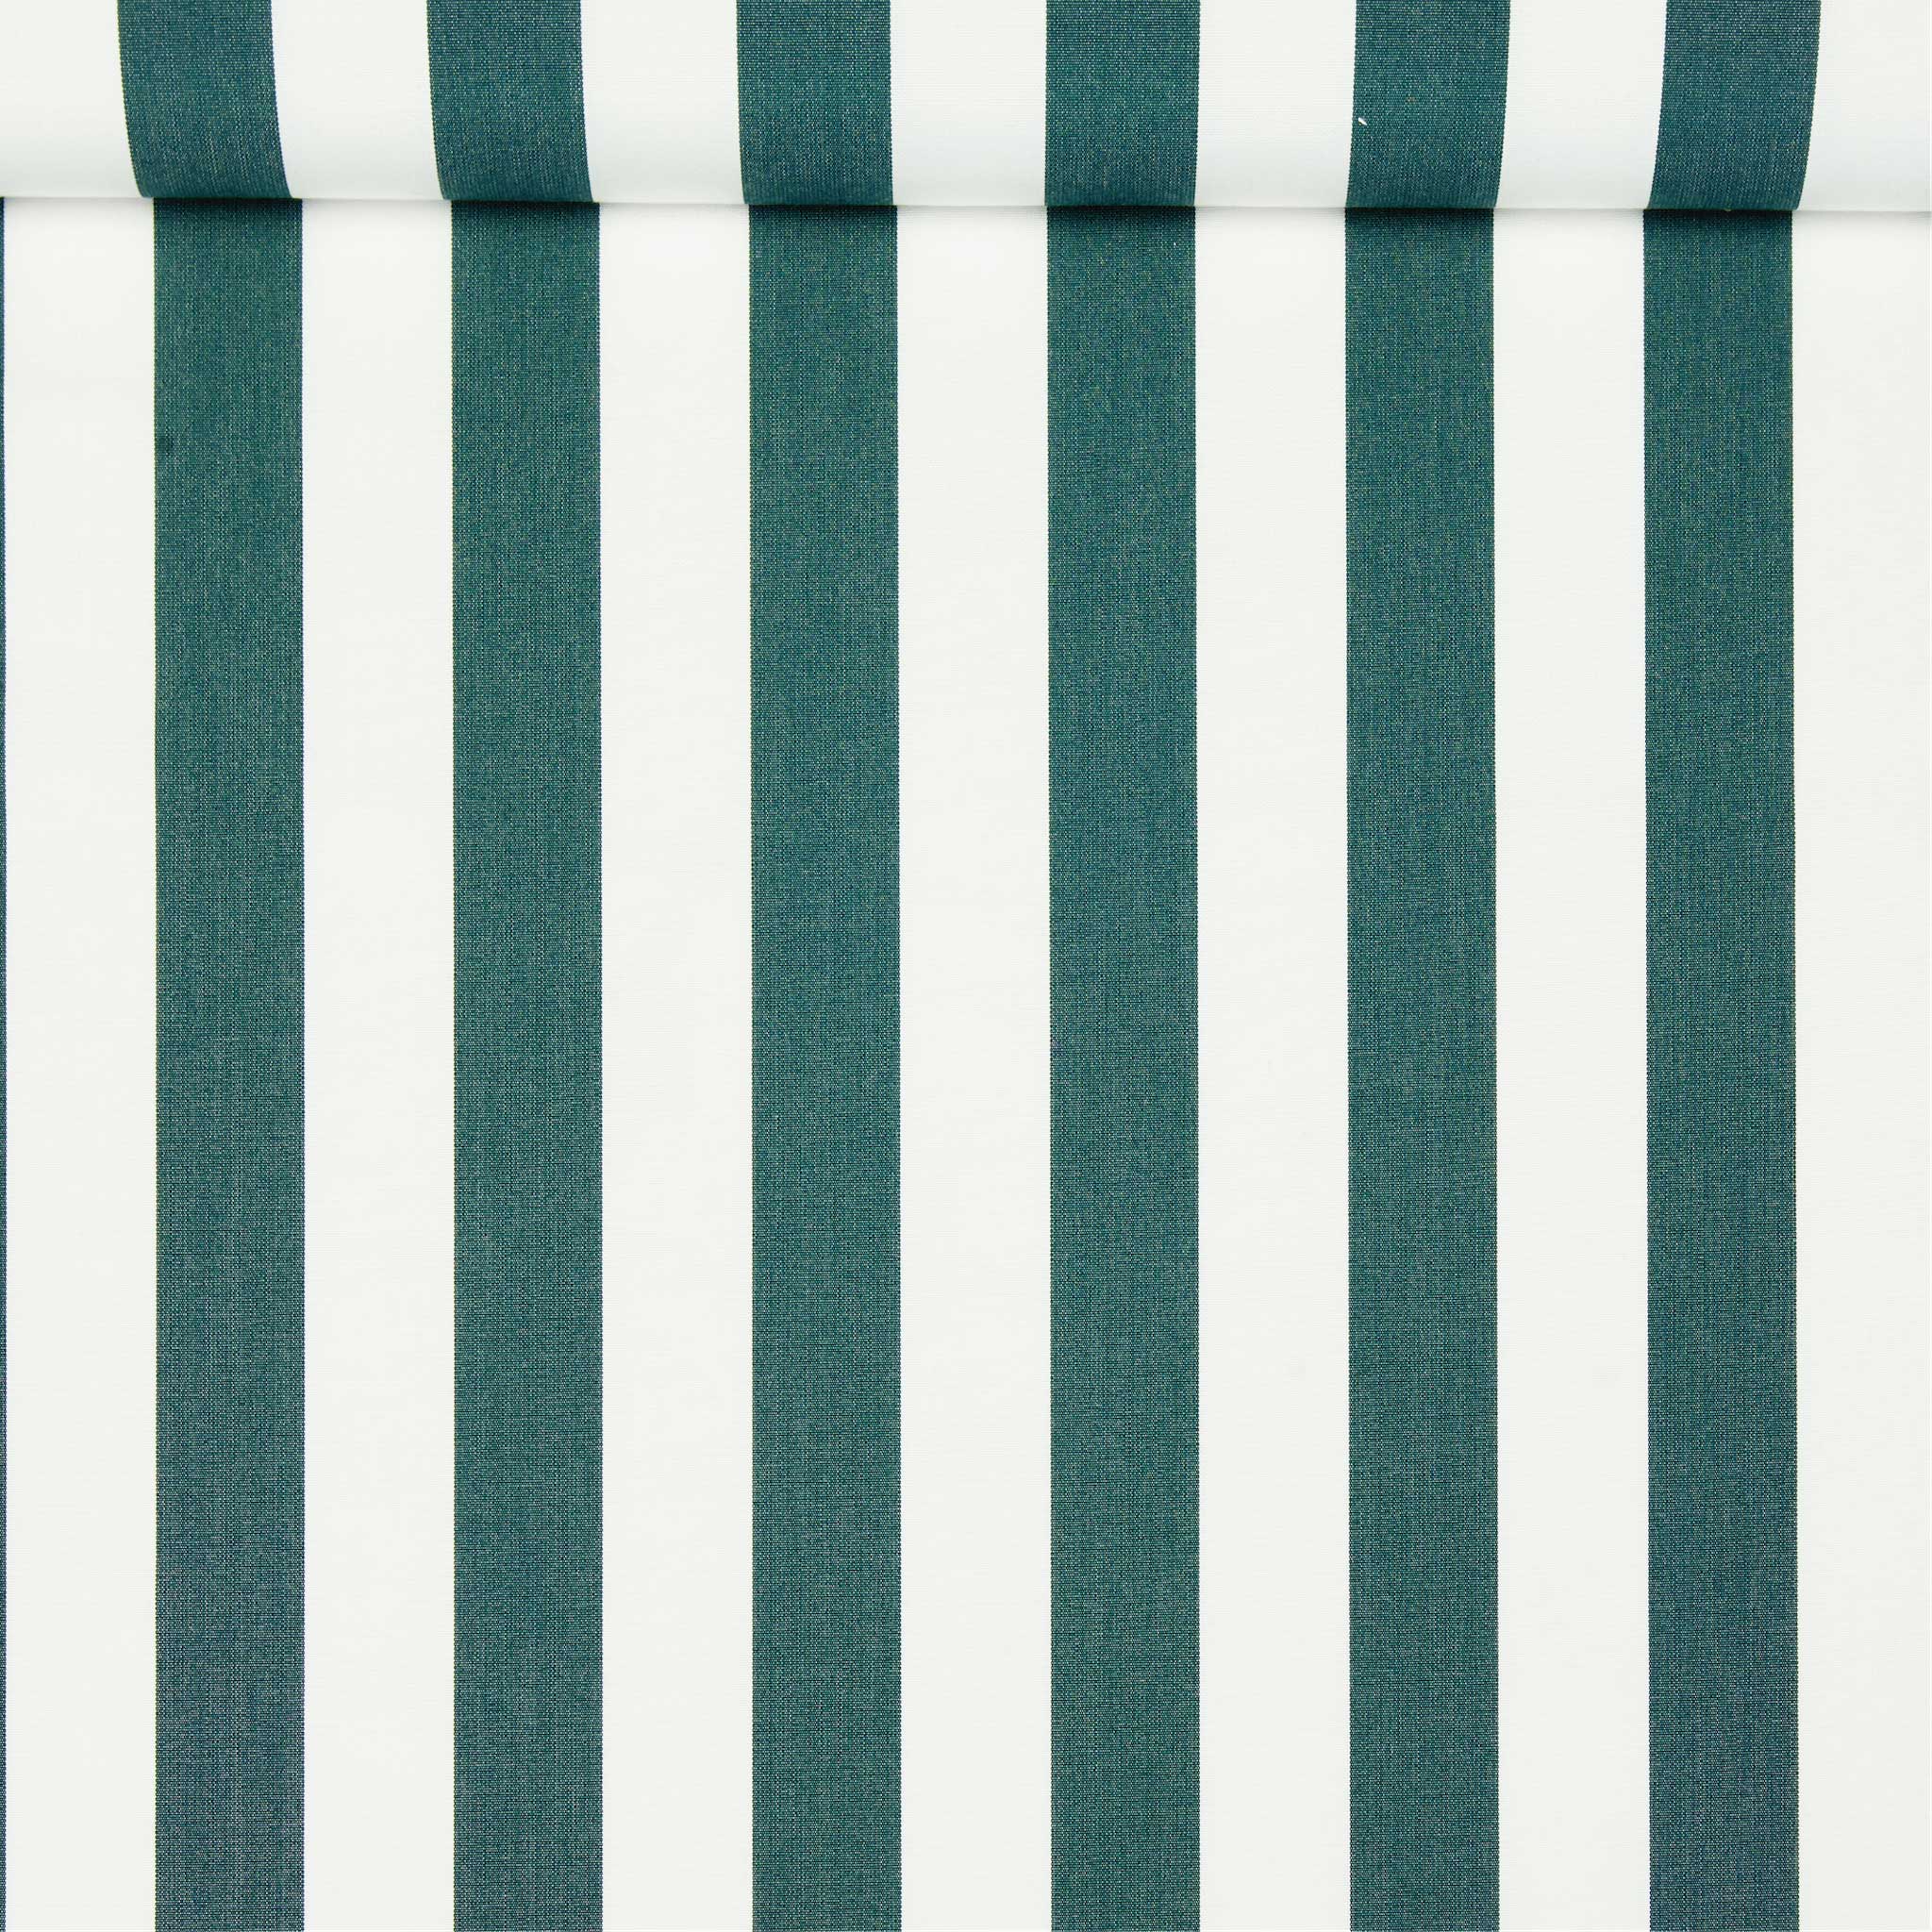 A birds eye view of a jacquard woven white and green striped pattern outdoor performance fabric roll. 